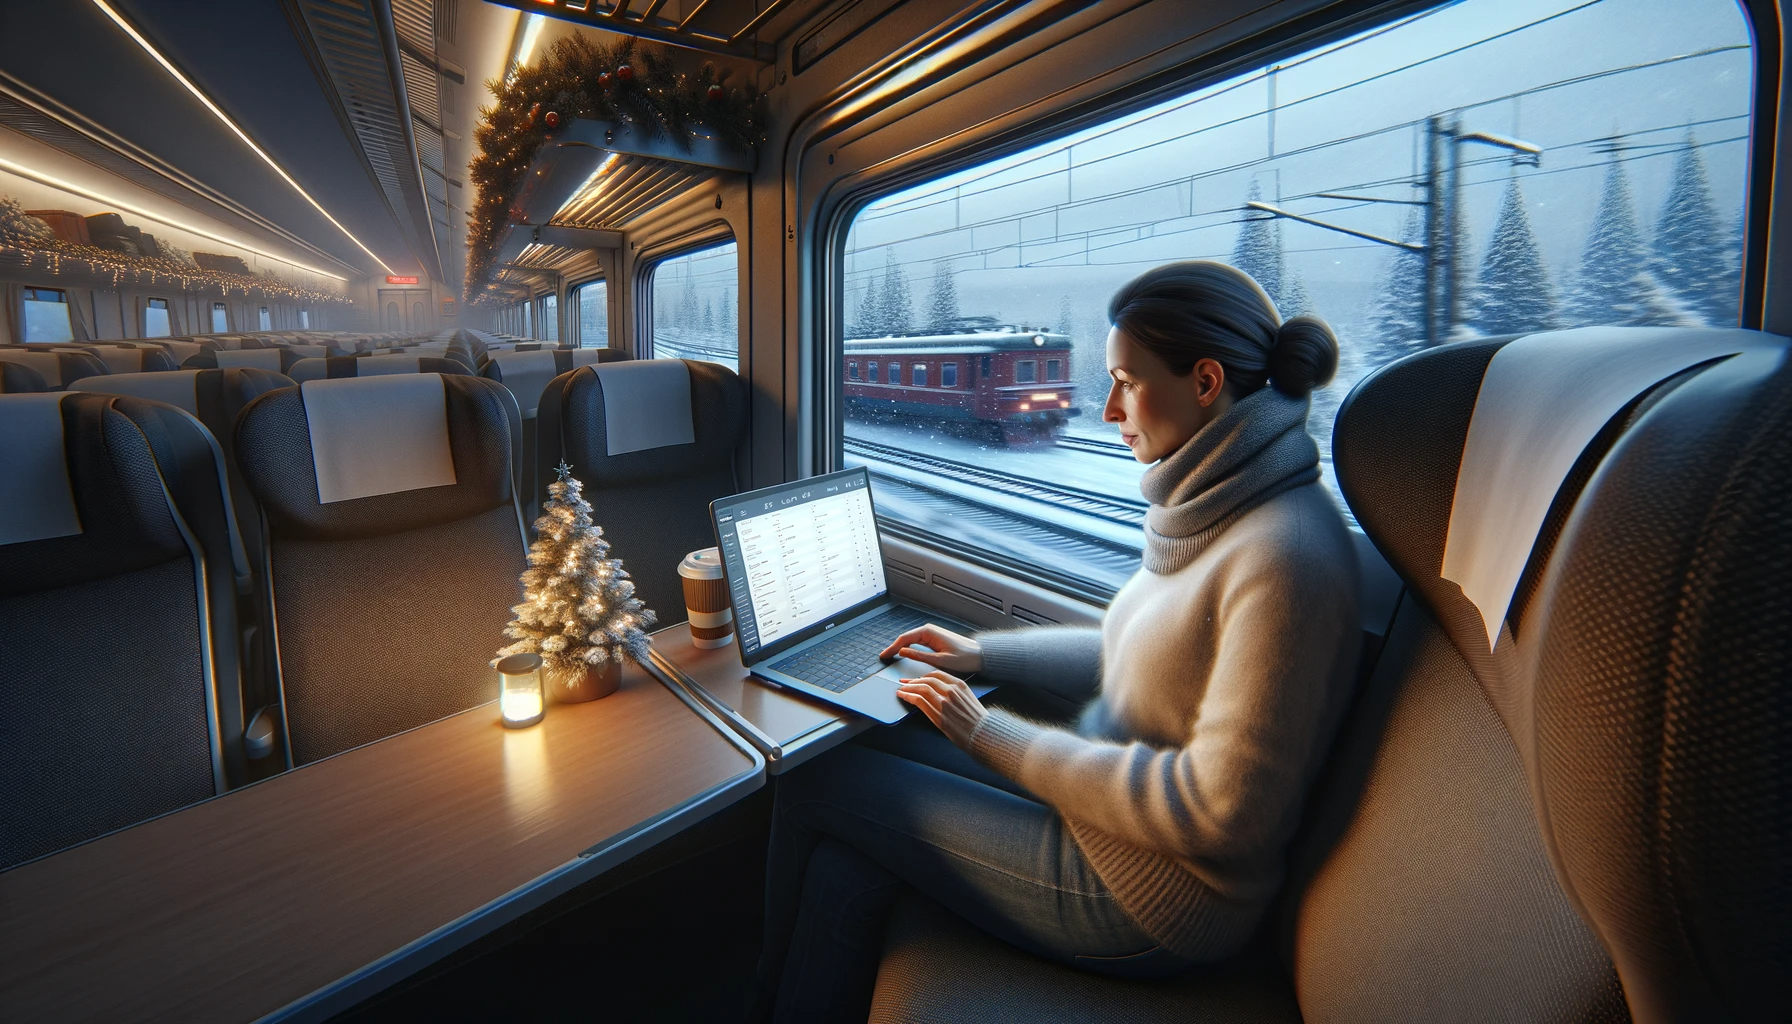 A realistic image of a person sitting on a train, heading home for the holidays. The scene shows a passenger, a middle-aged Caucasian woman, comfortab